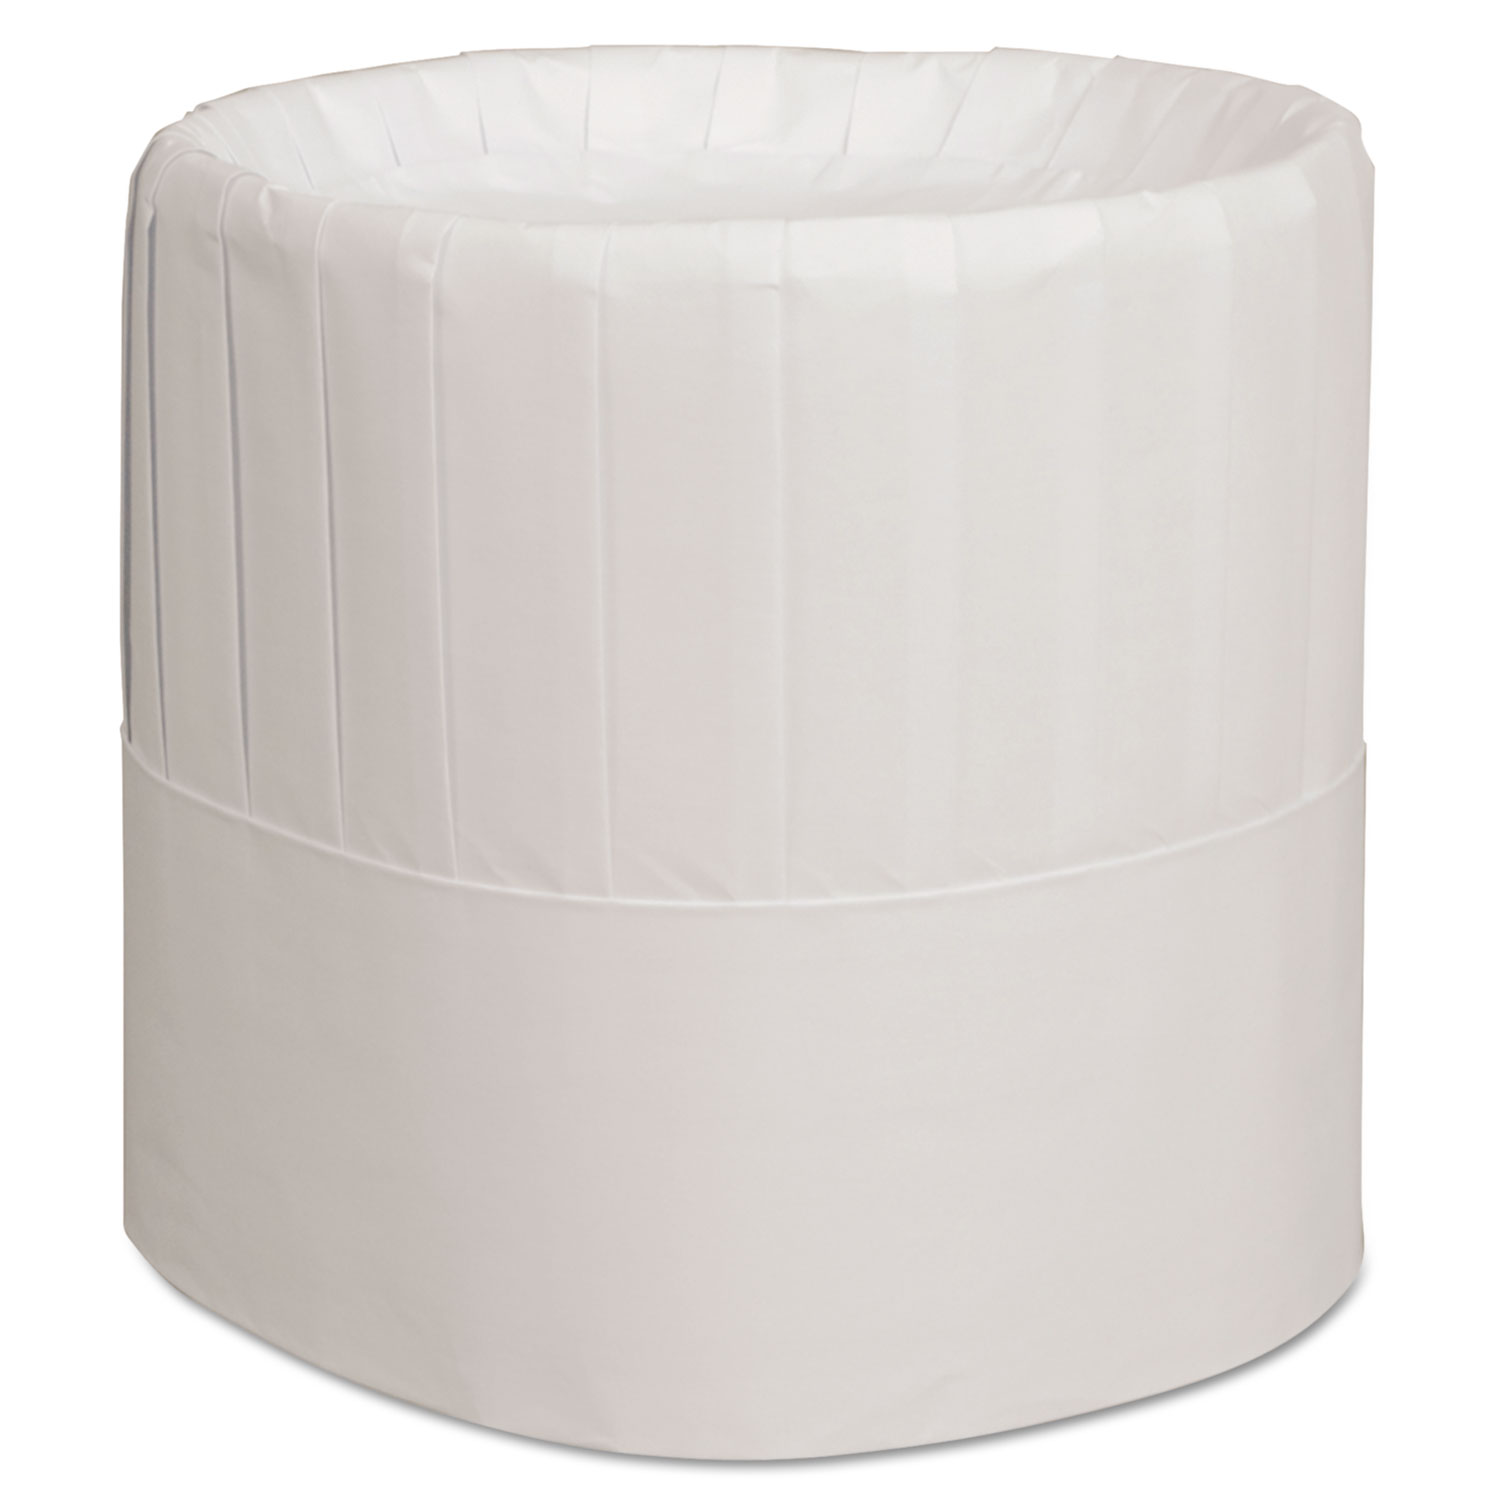 Pleated Chefs Hats, Paper, White, Adjustable, 7 in. Tall, 28/Carton